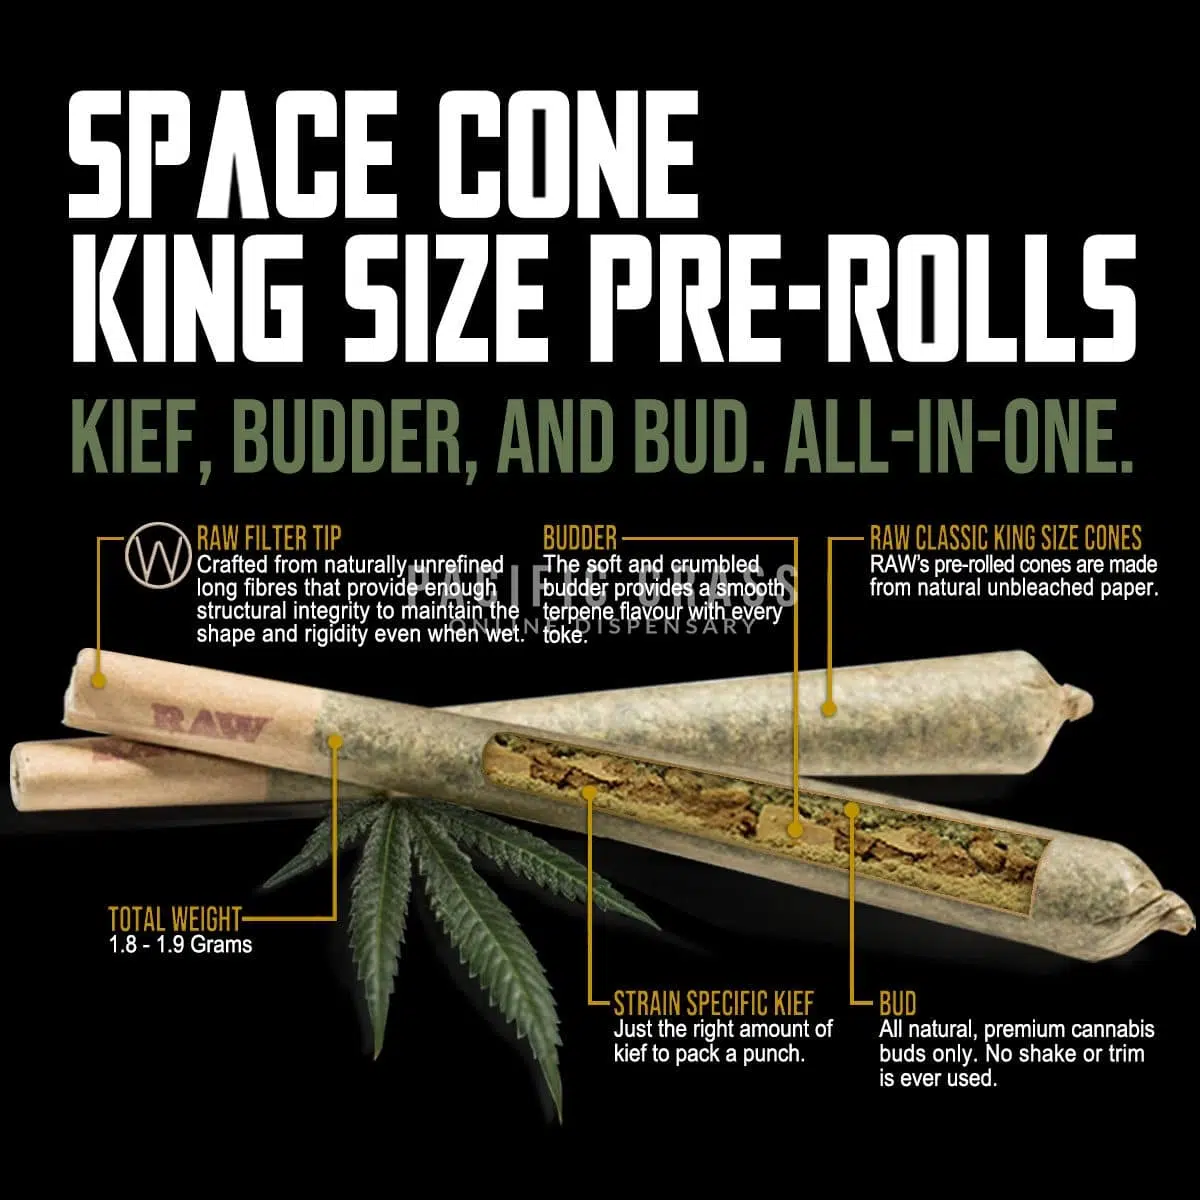 Space Cone King Size Pre-rolls